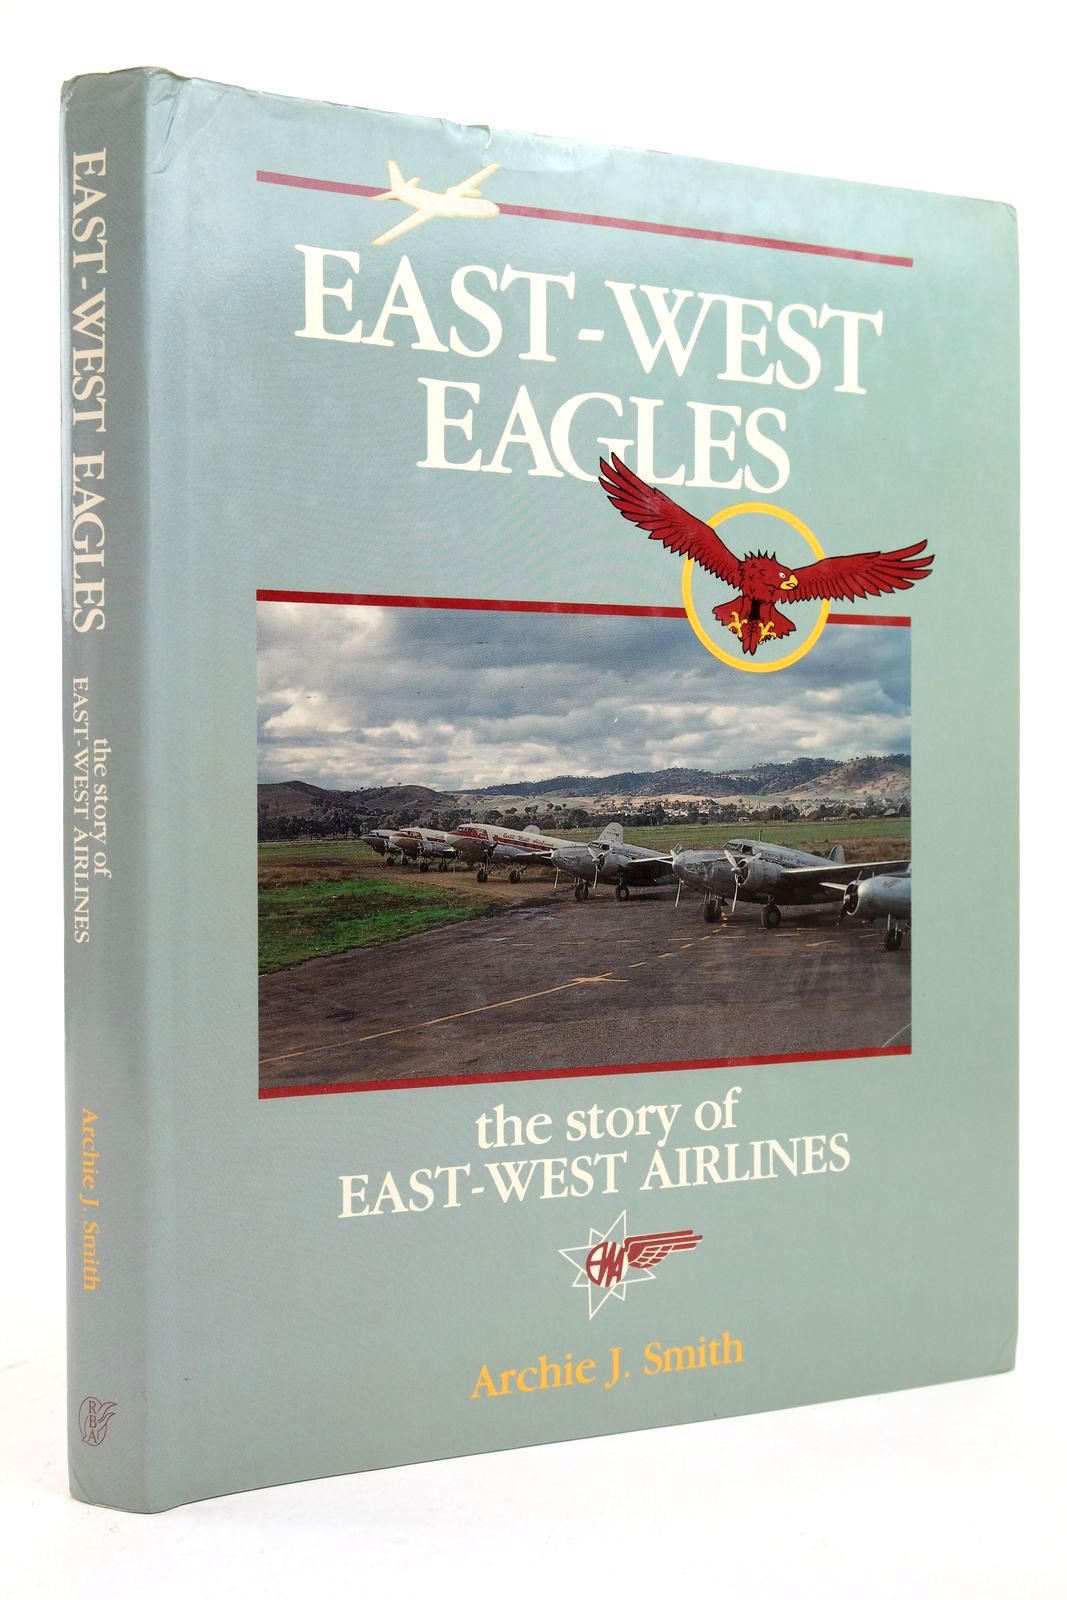 Photo of EAST-WEST EAGLES THE STORY OF EAST-WEST AIRLINES written by Smith, Archie J. published by Robert Brown & Associates (aust) Pty. Ltd (STOCK CODE: 2139417)  for sale by Stella & Rose's Books